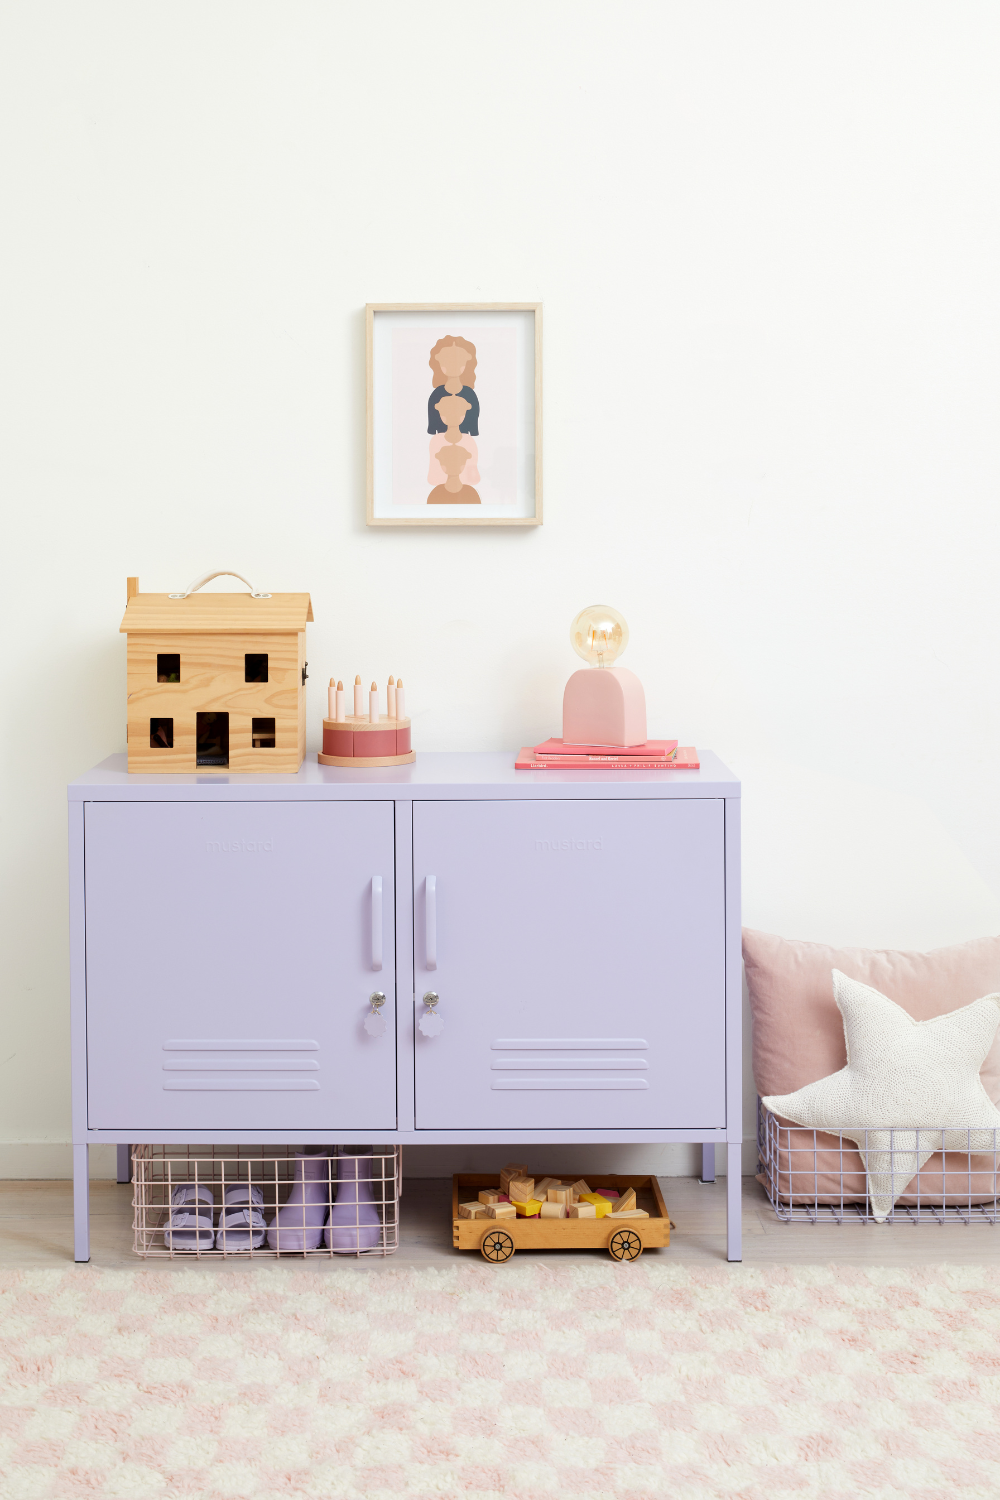 A Lilac Lowdown sits in a kids room styled with wooden toys and Blush soft furnishings. There is a Blush and white checkered rug on the floor.